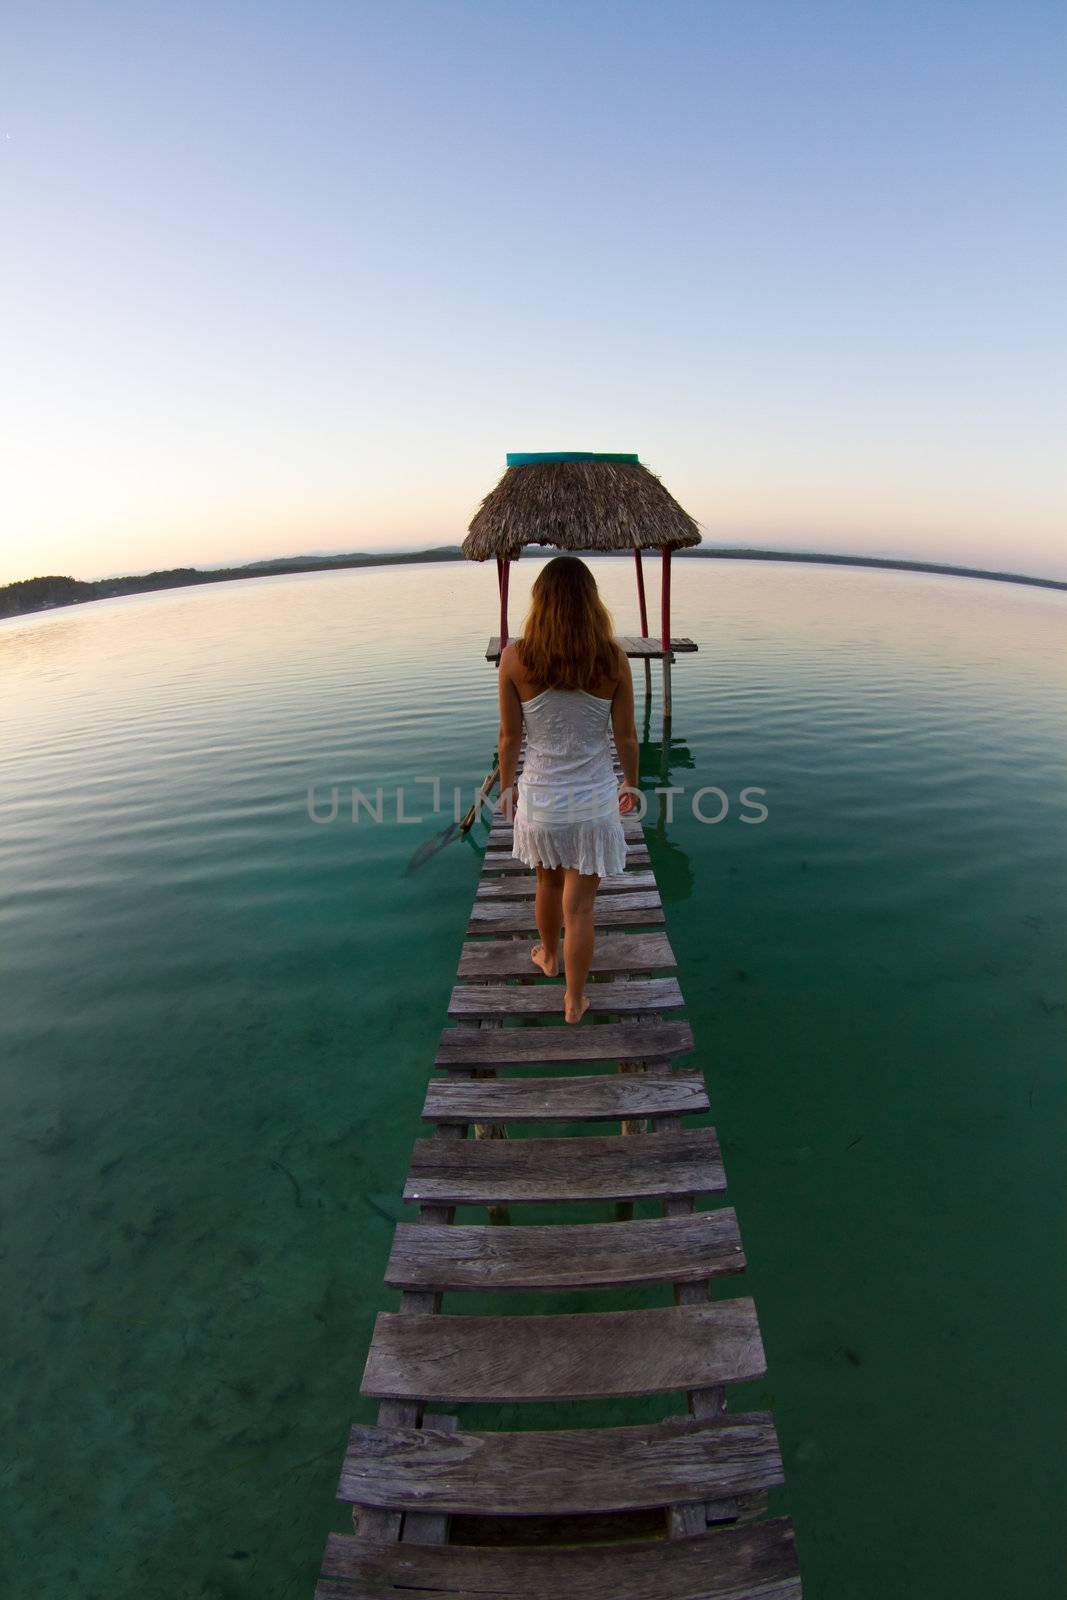 A young woman enjoys the early morning on the lake